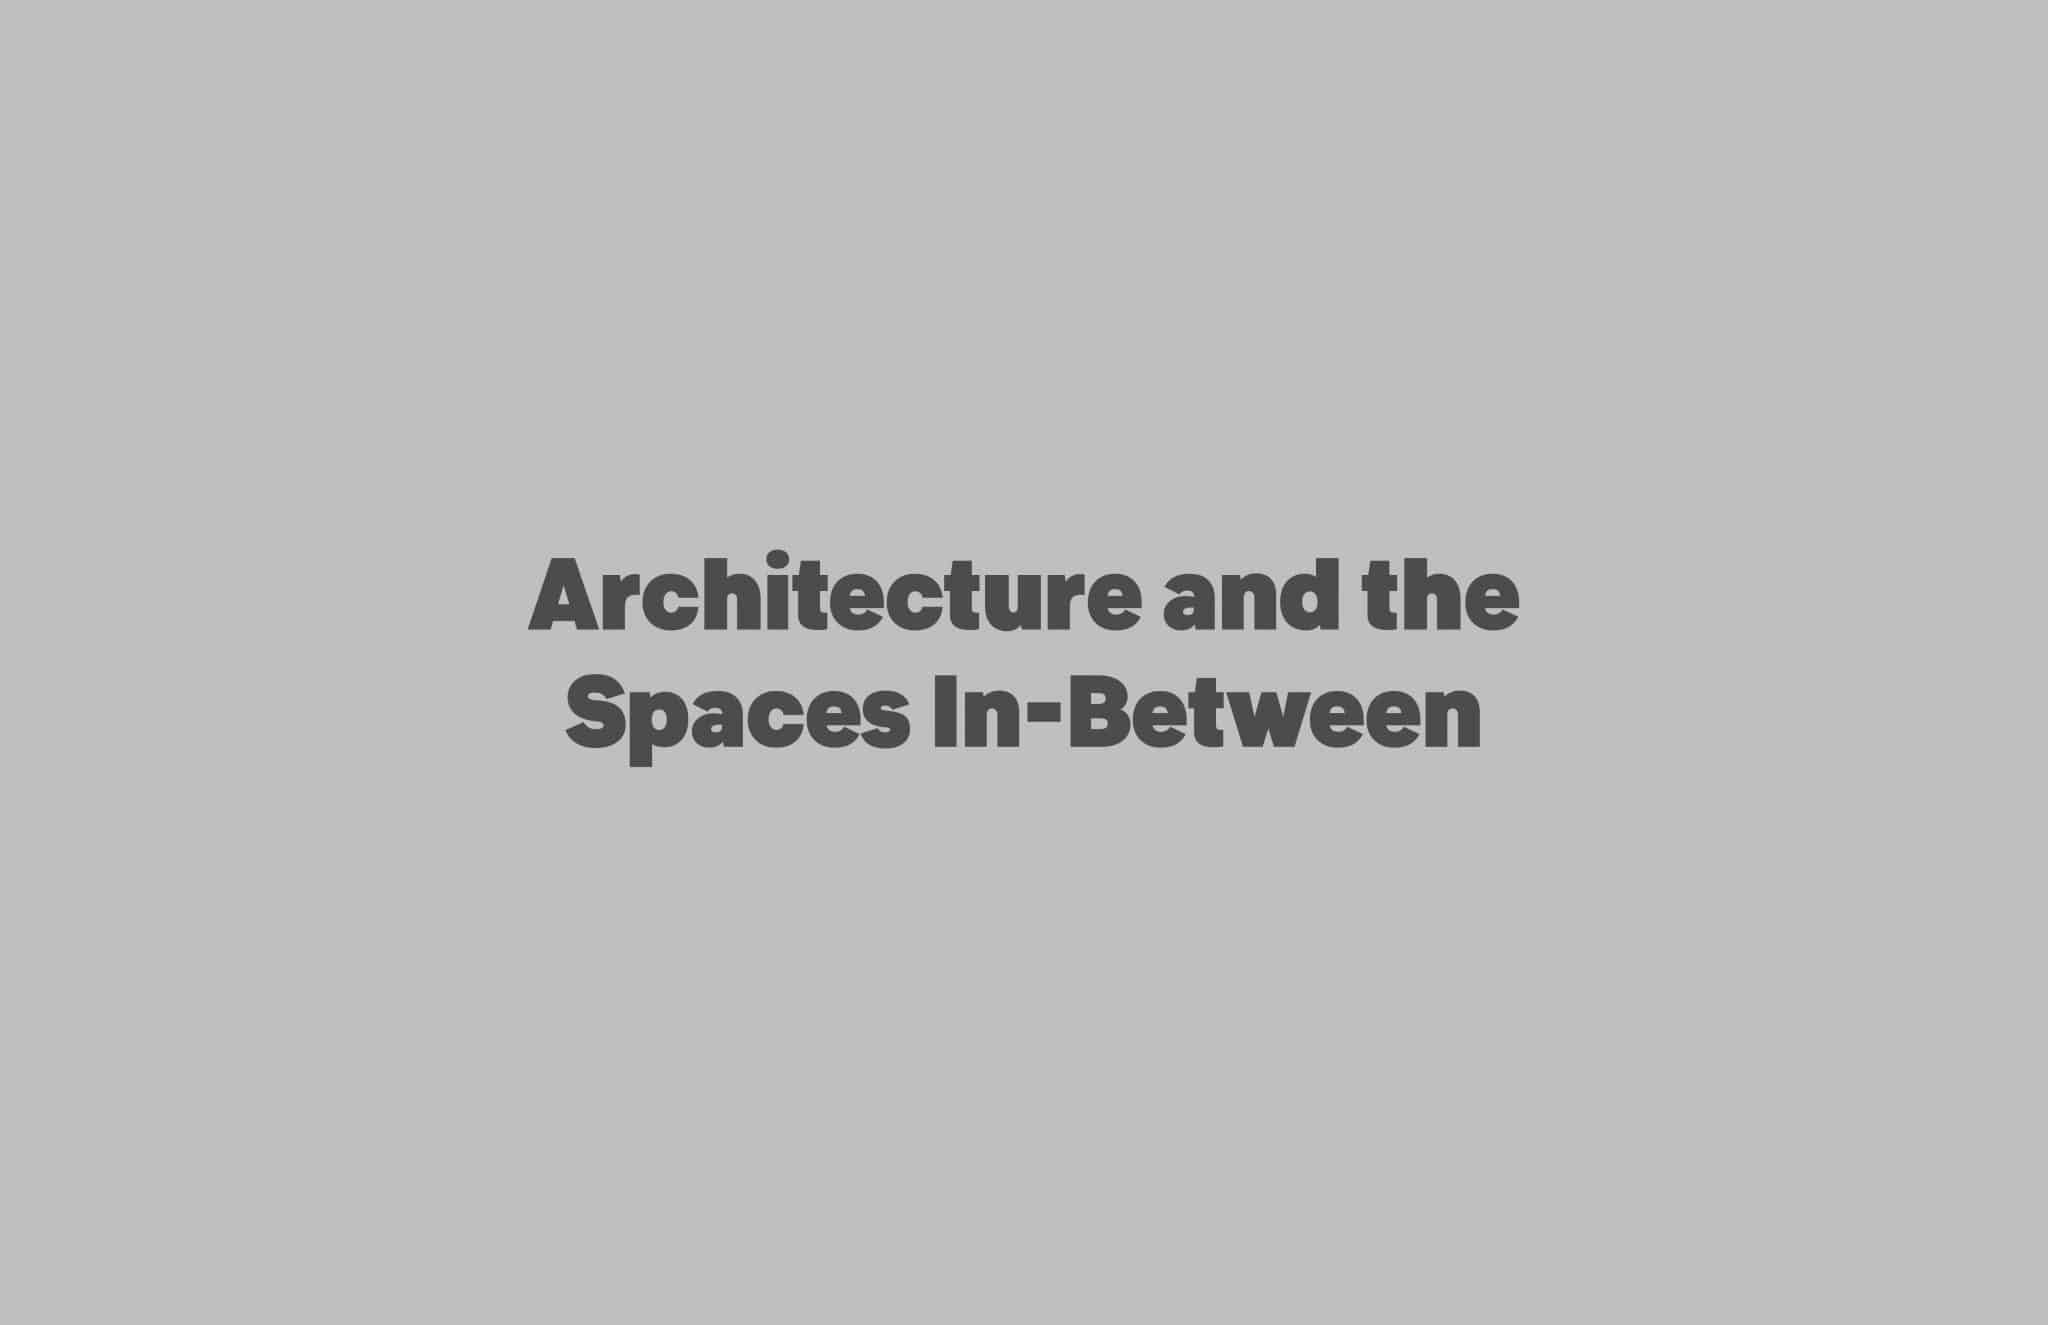   Architecture and the Spaces In-Between , Alexander Mayhew, University of Calgary 